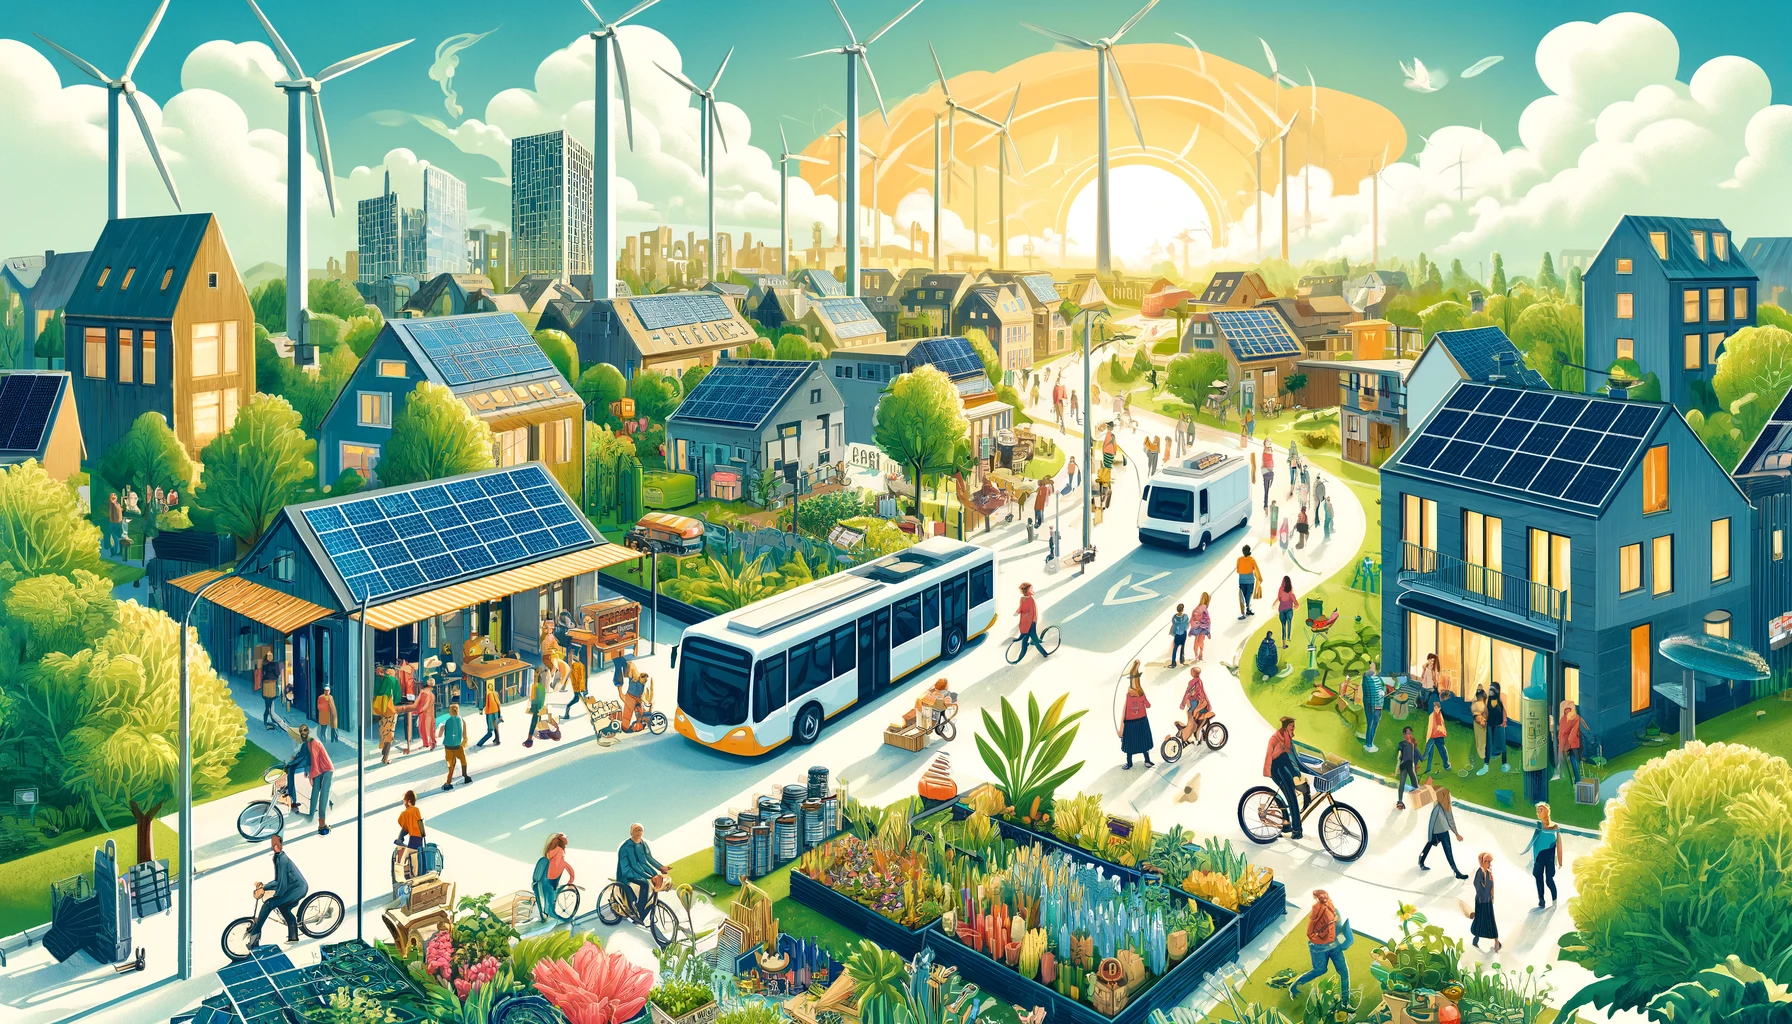 An illustrated view of a sustainable community with solar panels, wind turbines, lush green spaces, and diverse people engaging in eco-friendly activities.